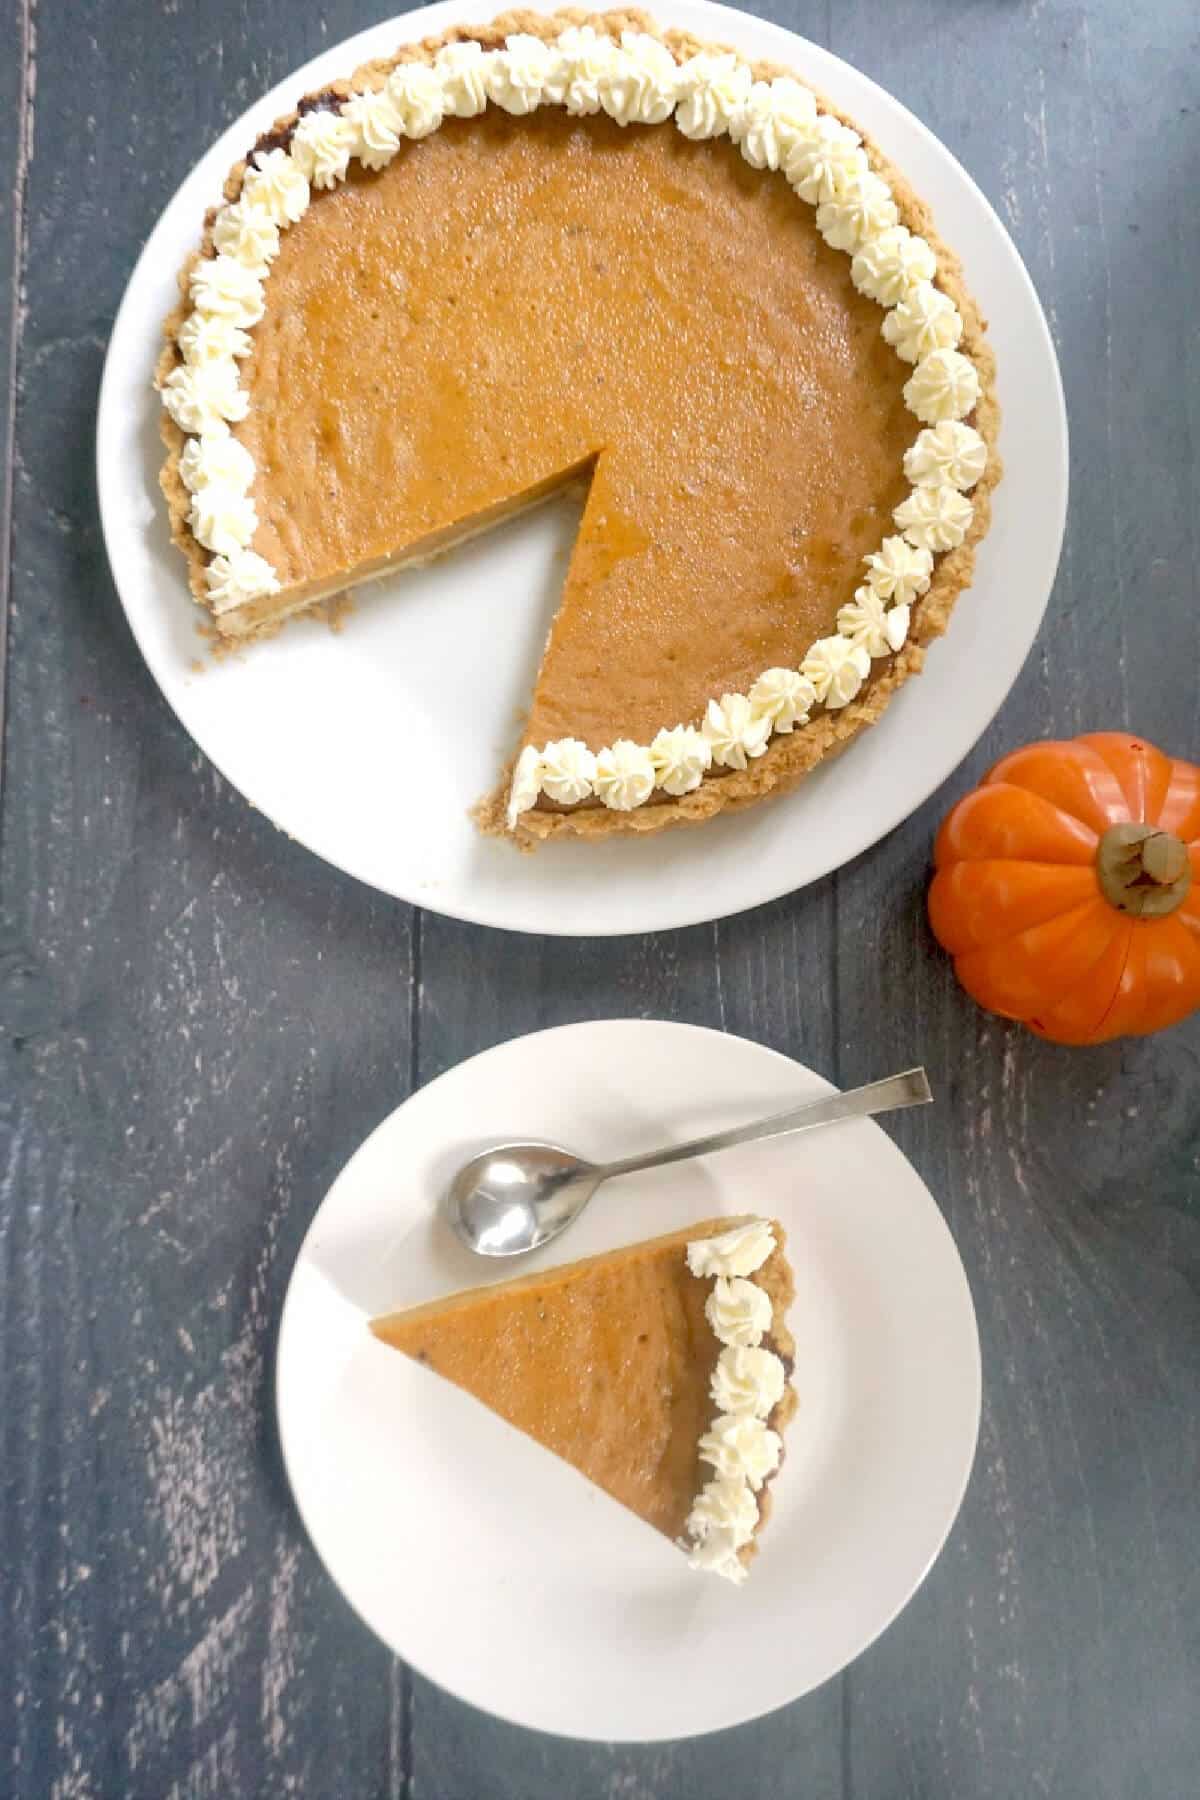 Overhead shoot of a white plate with a slice of pumpkin pie and another plate with the rest of the pie.